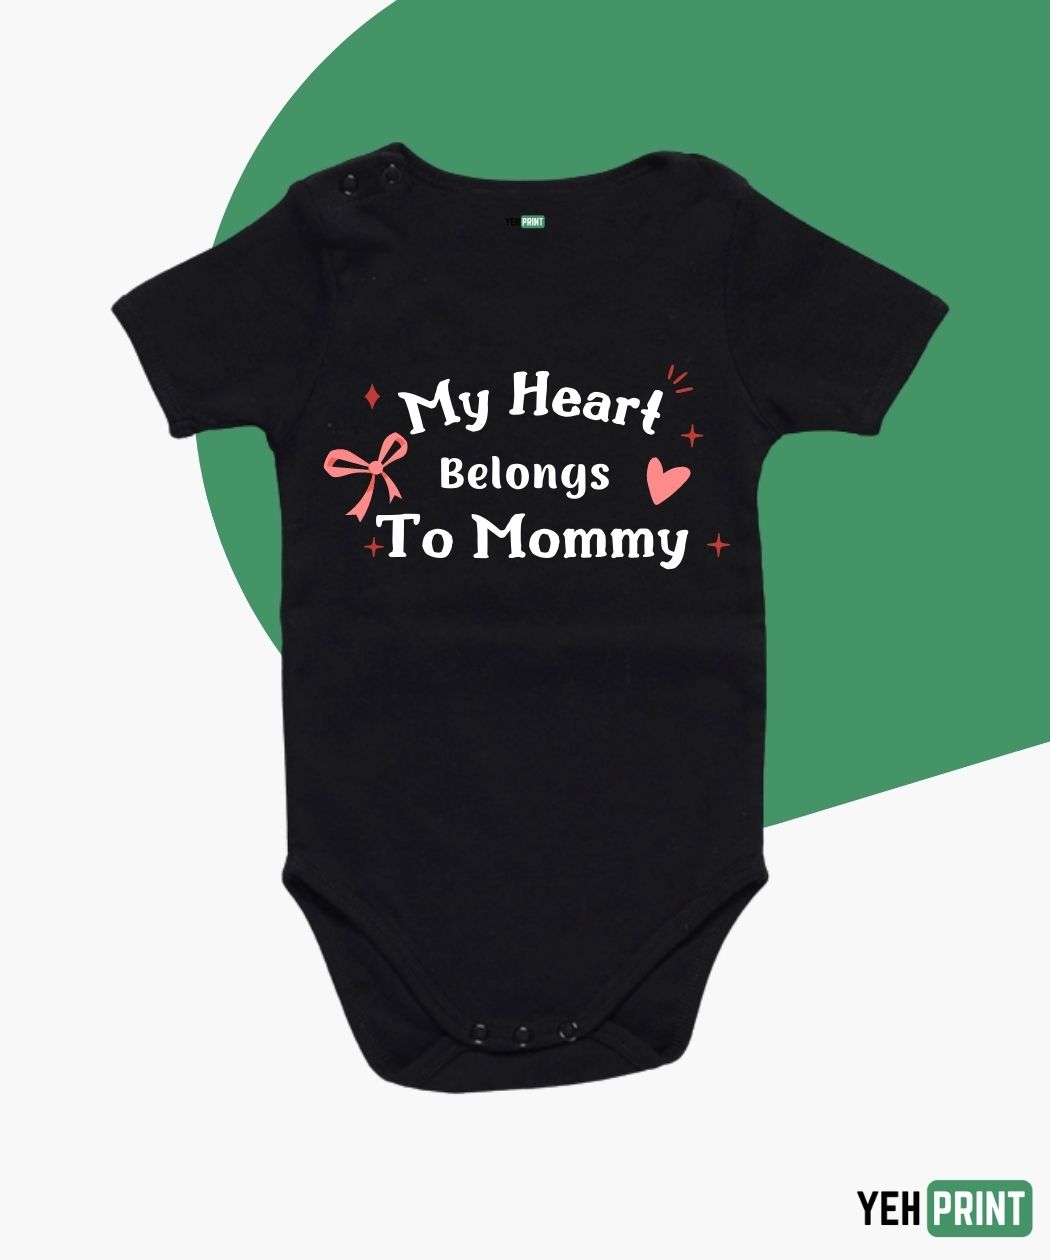 My Heart Belongs To Mommy Baby Romper in Pakistan. Personalized Newborn 100% cotton baby rompers.